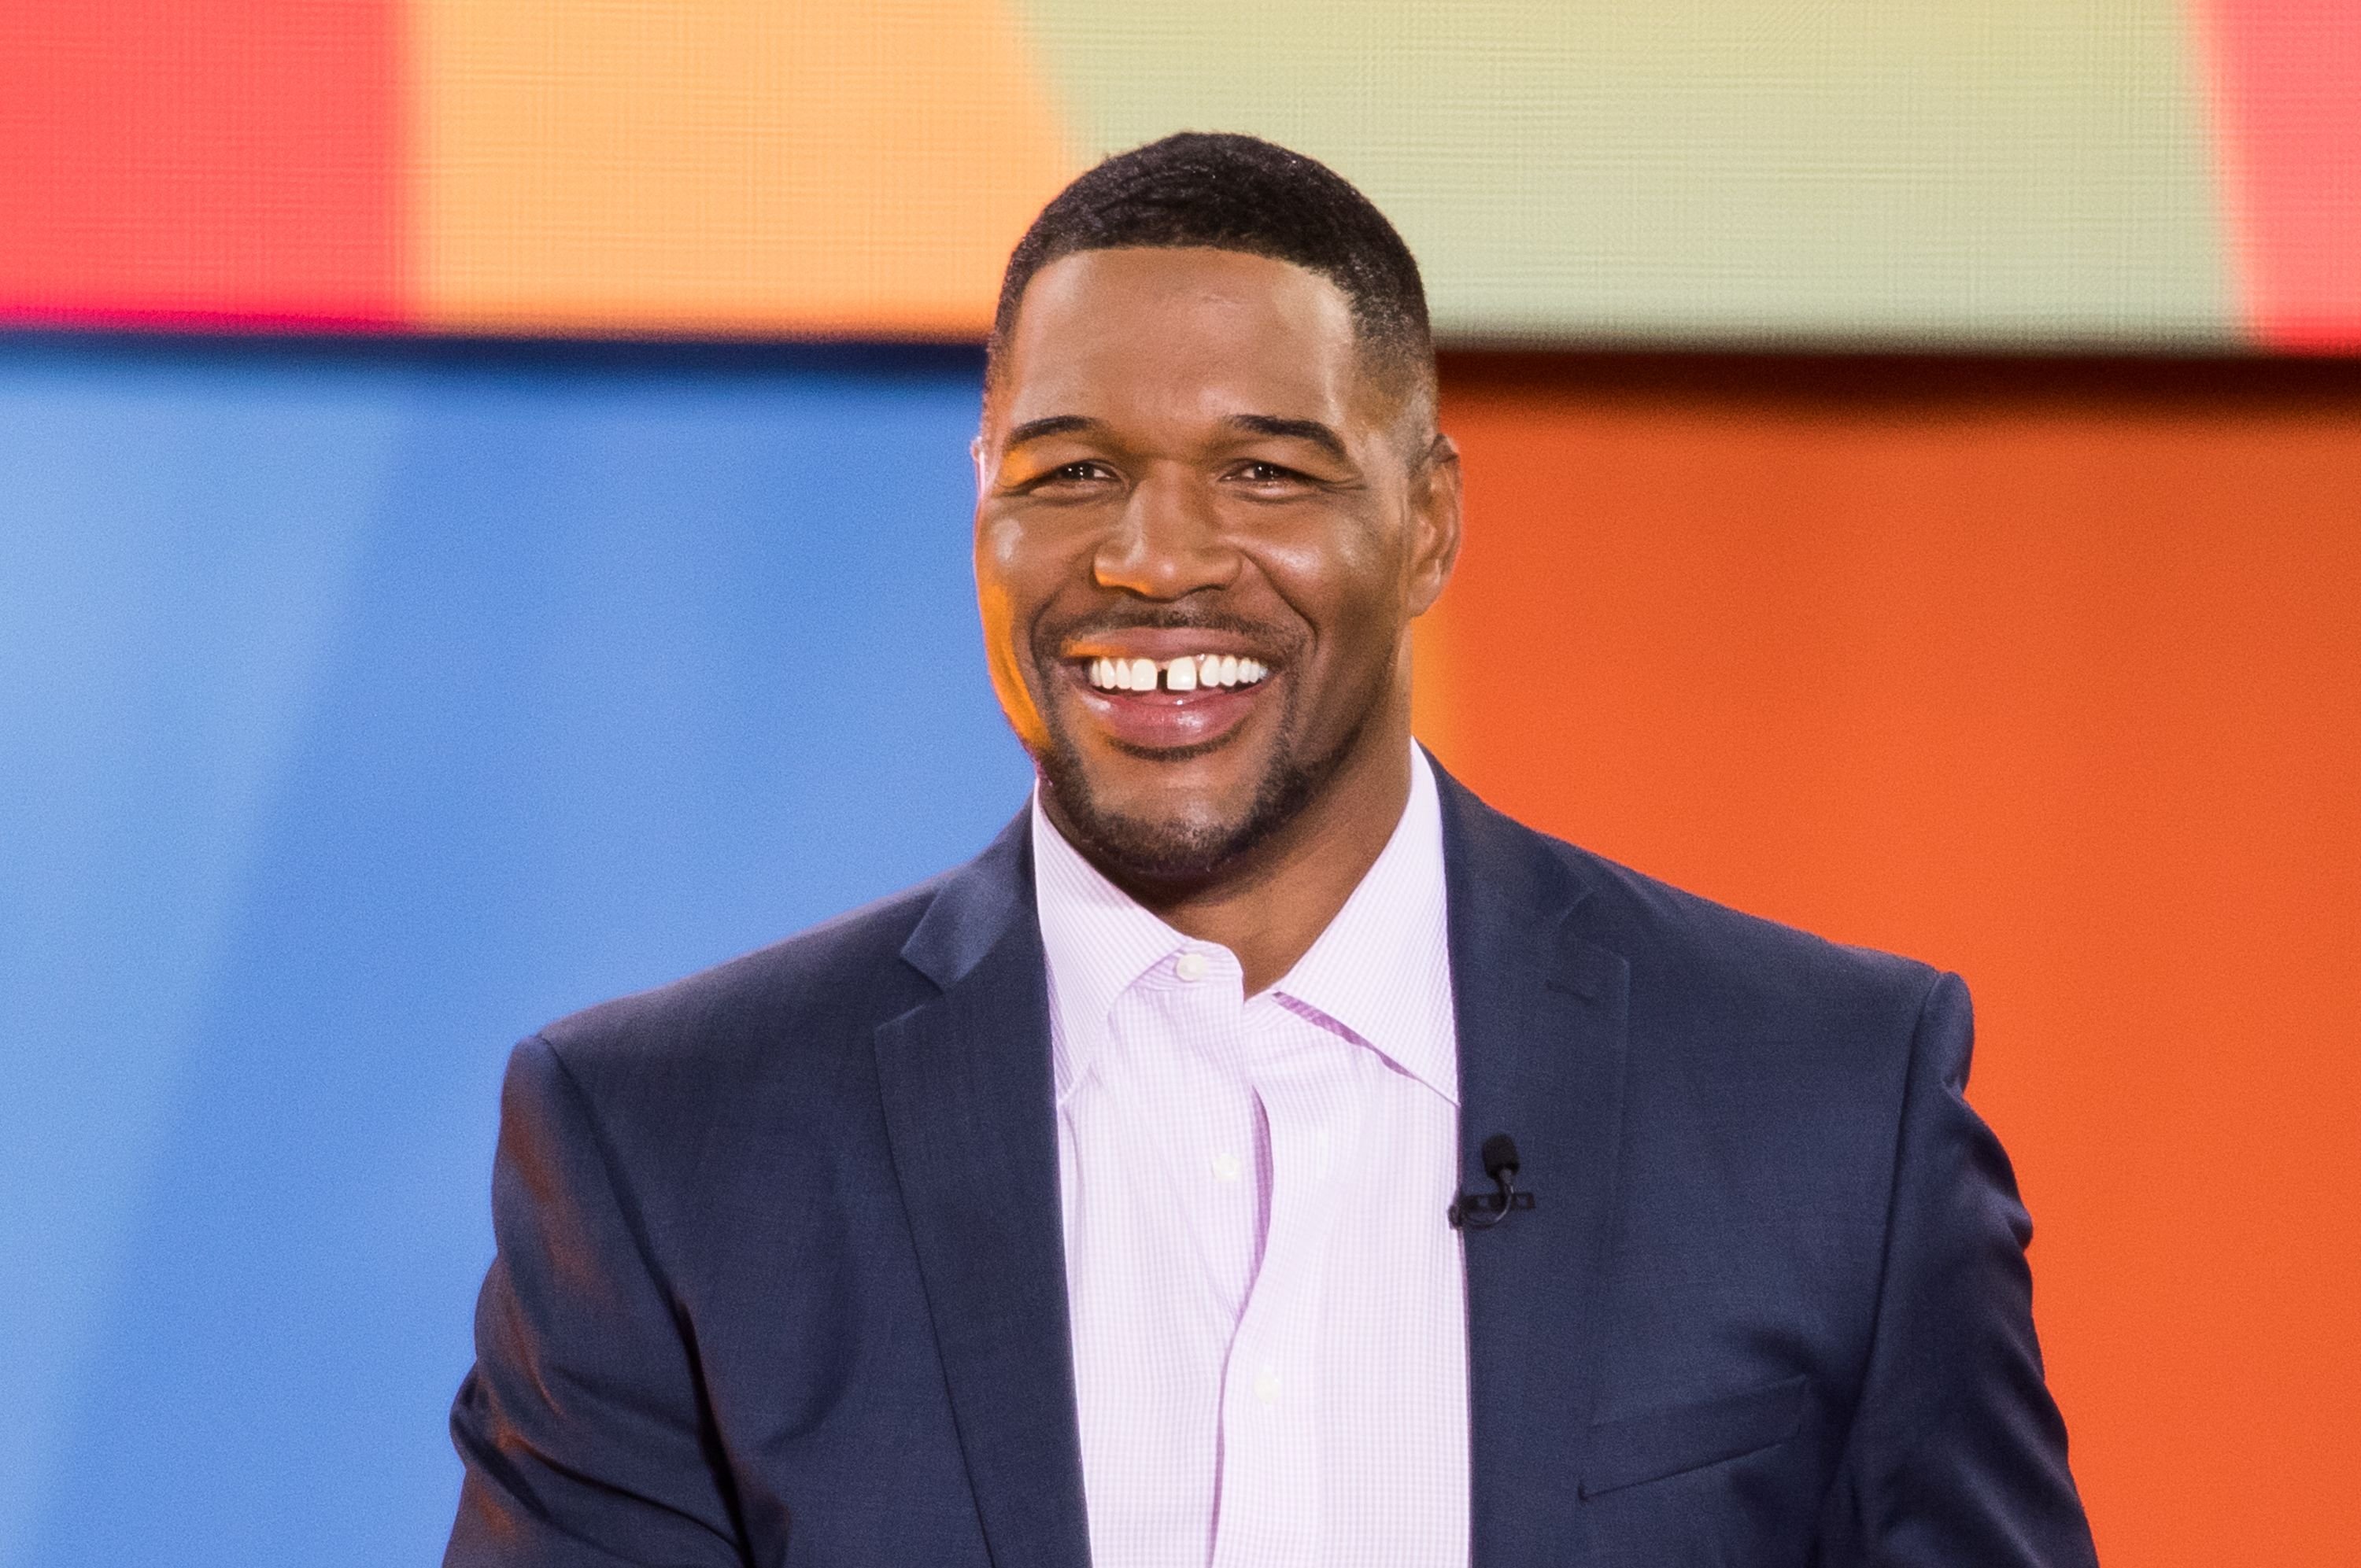 Michael Strahan at ABC's "Good Morning America" at Rumsey Playfield, Central Park on July 6, 2018 | Photo: Getty Images